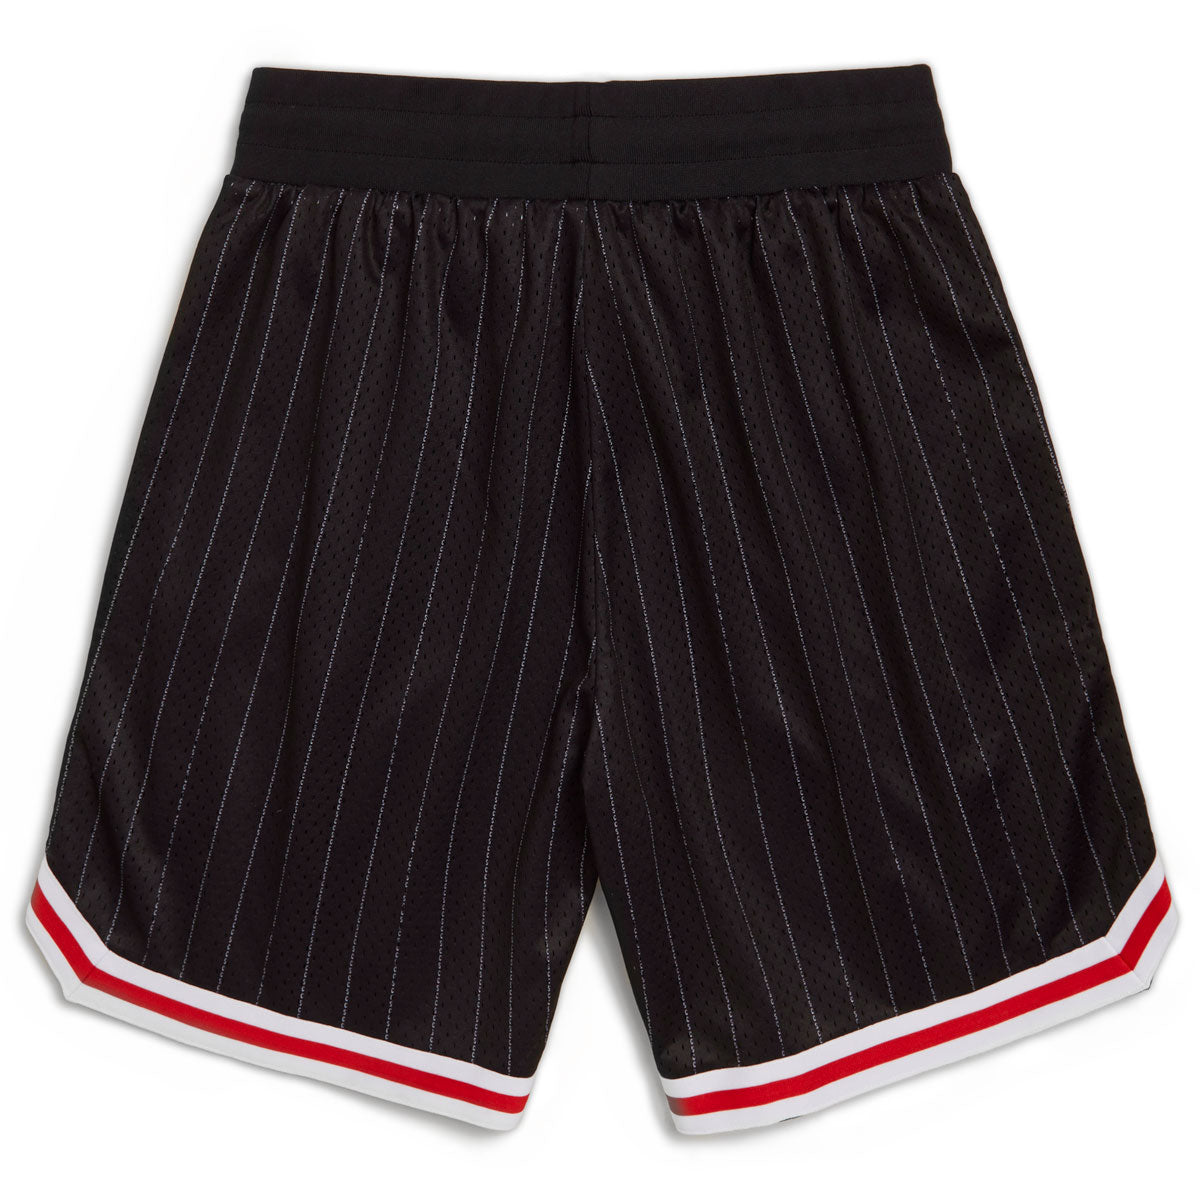 CCS Crossover Basketball Shorts - Black/Red image 2